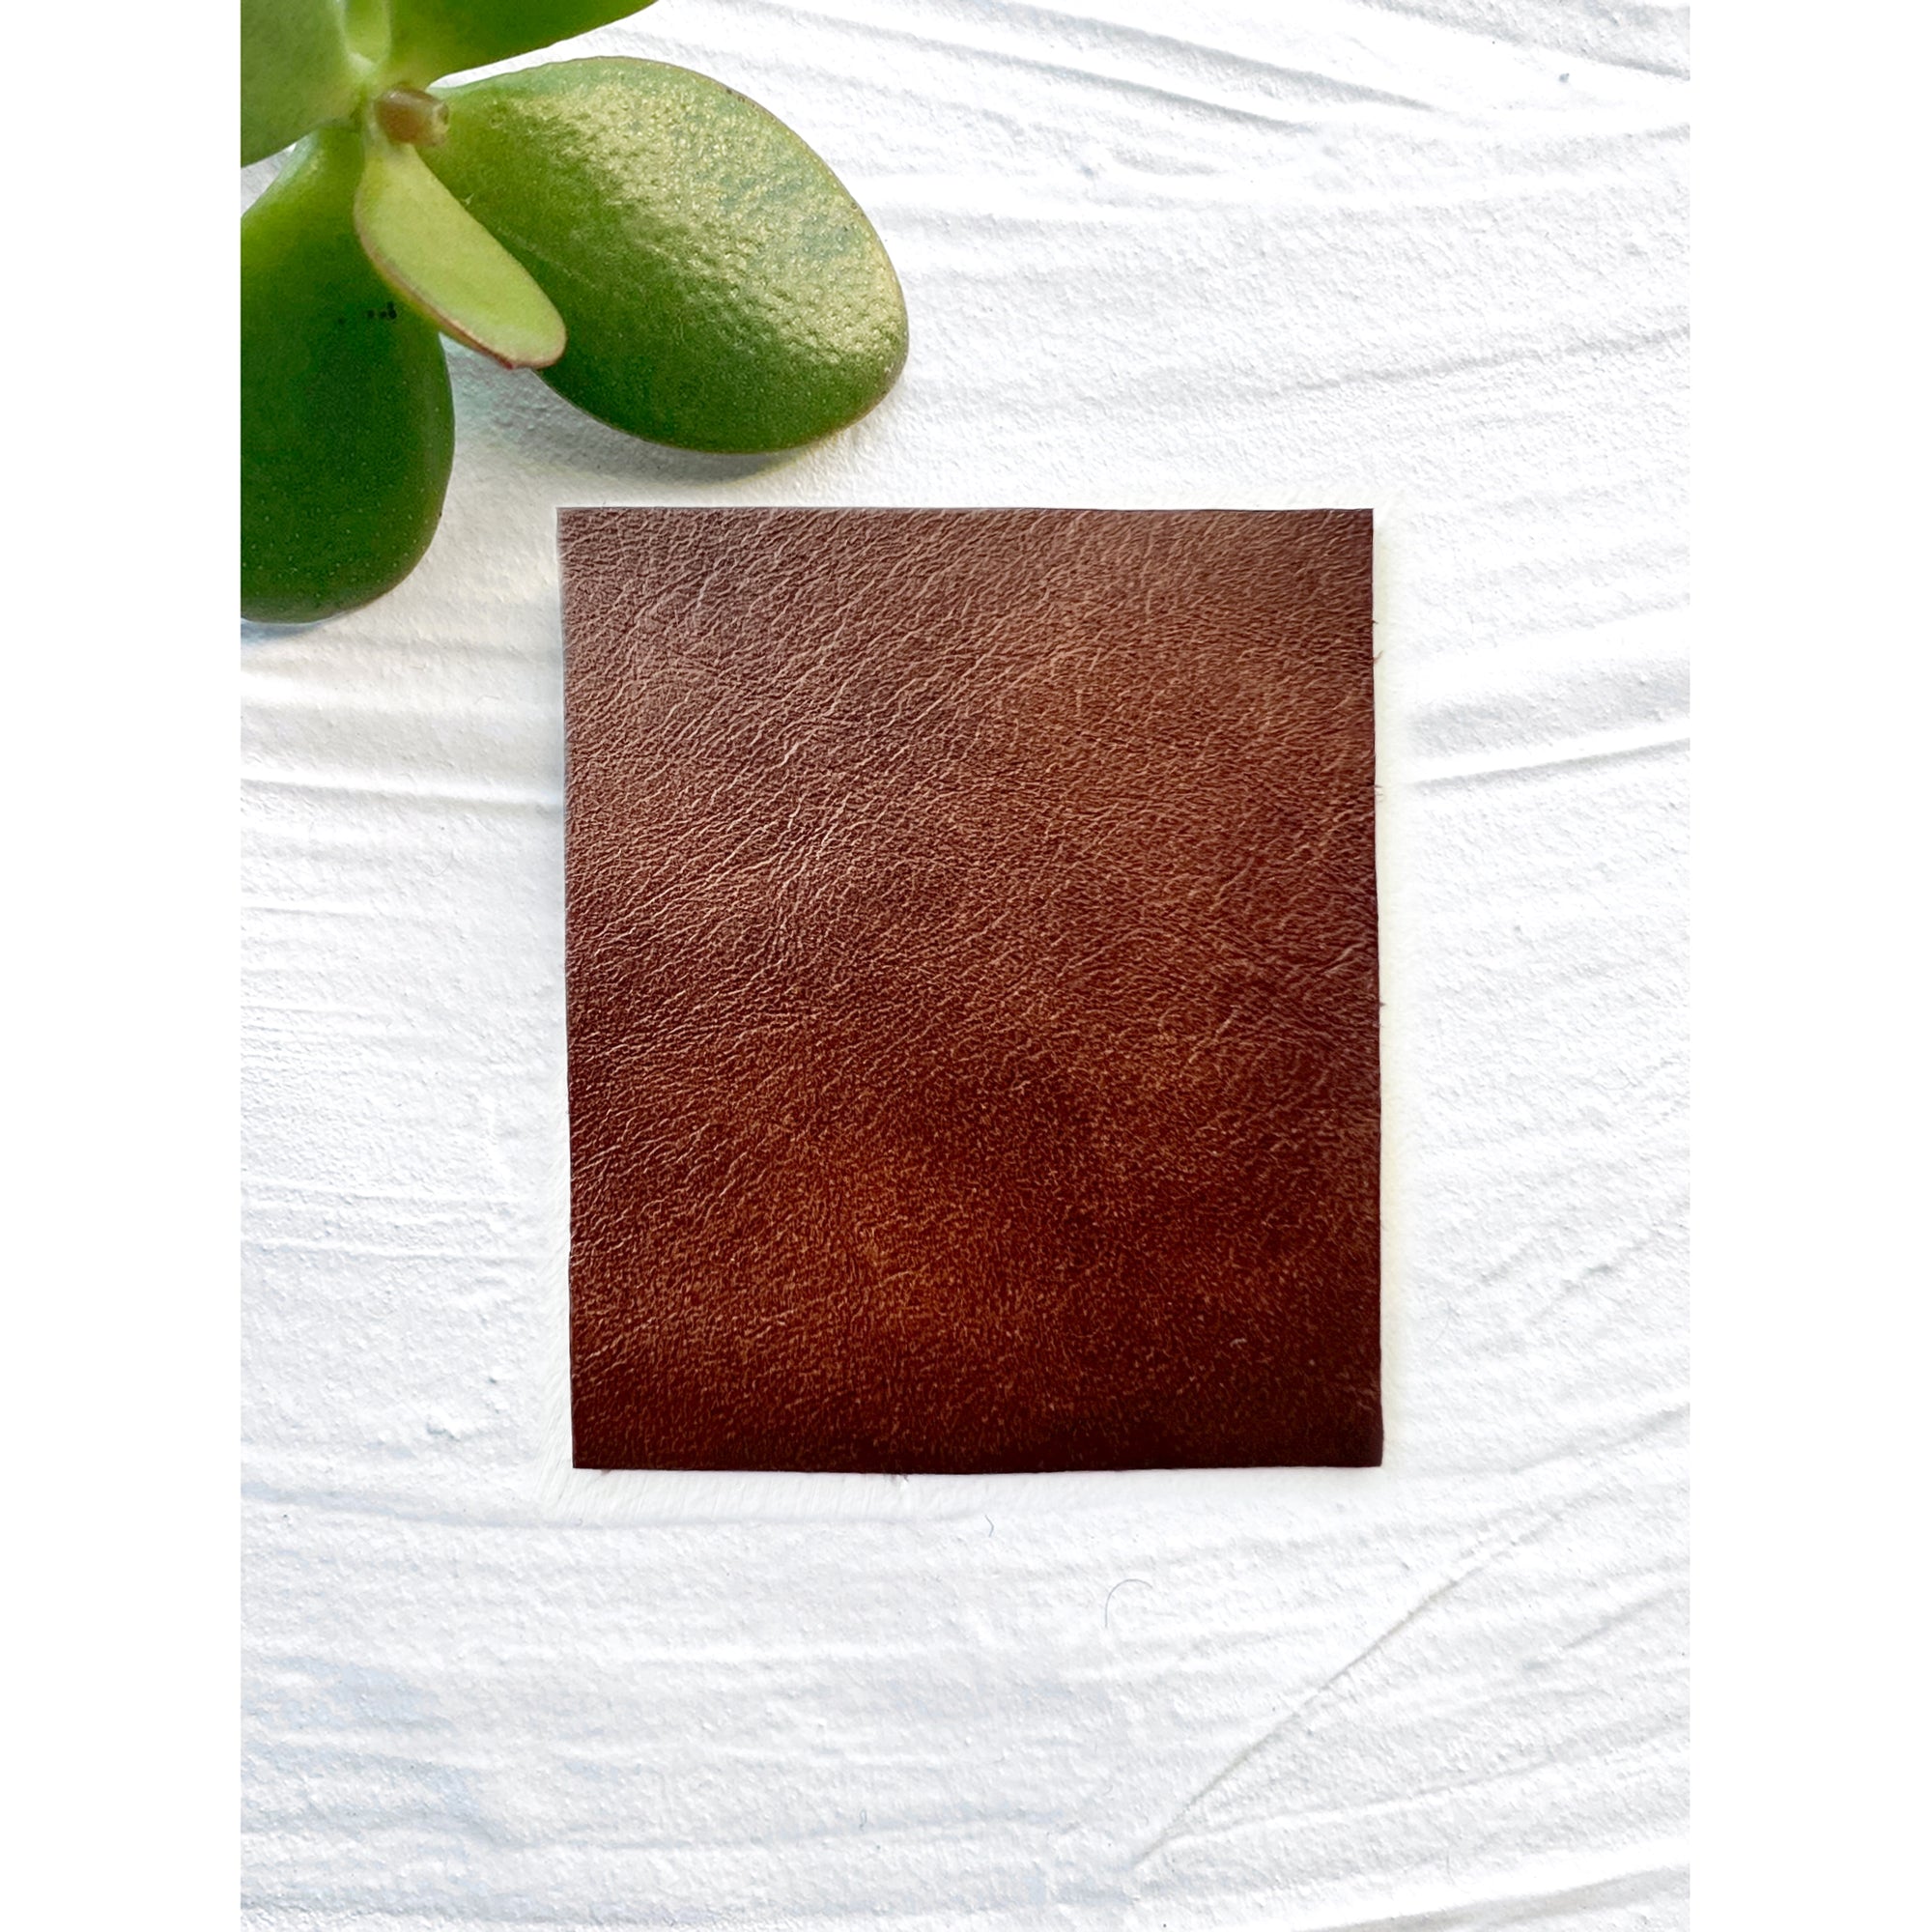 Cognac Distressed Leather Swatch